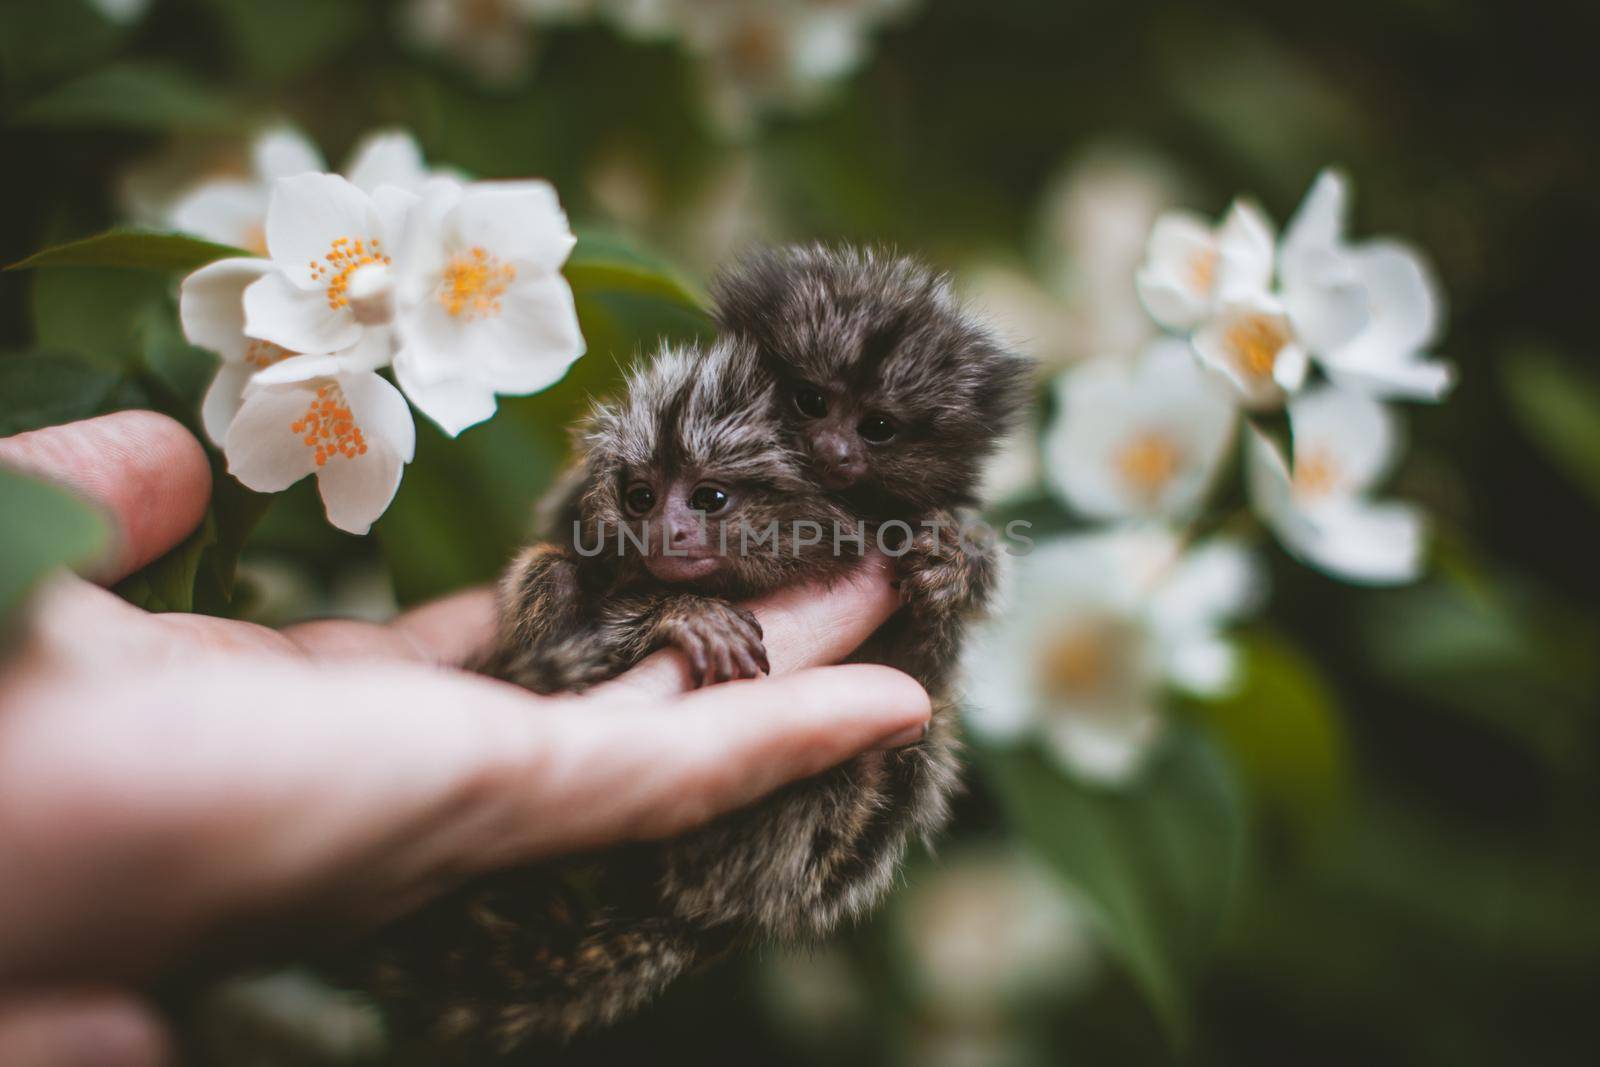 The common marmoset's babies on hand with philadelphus flower bush by RosaJay